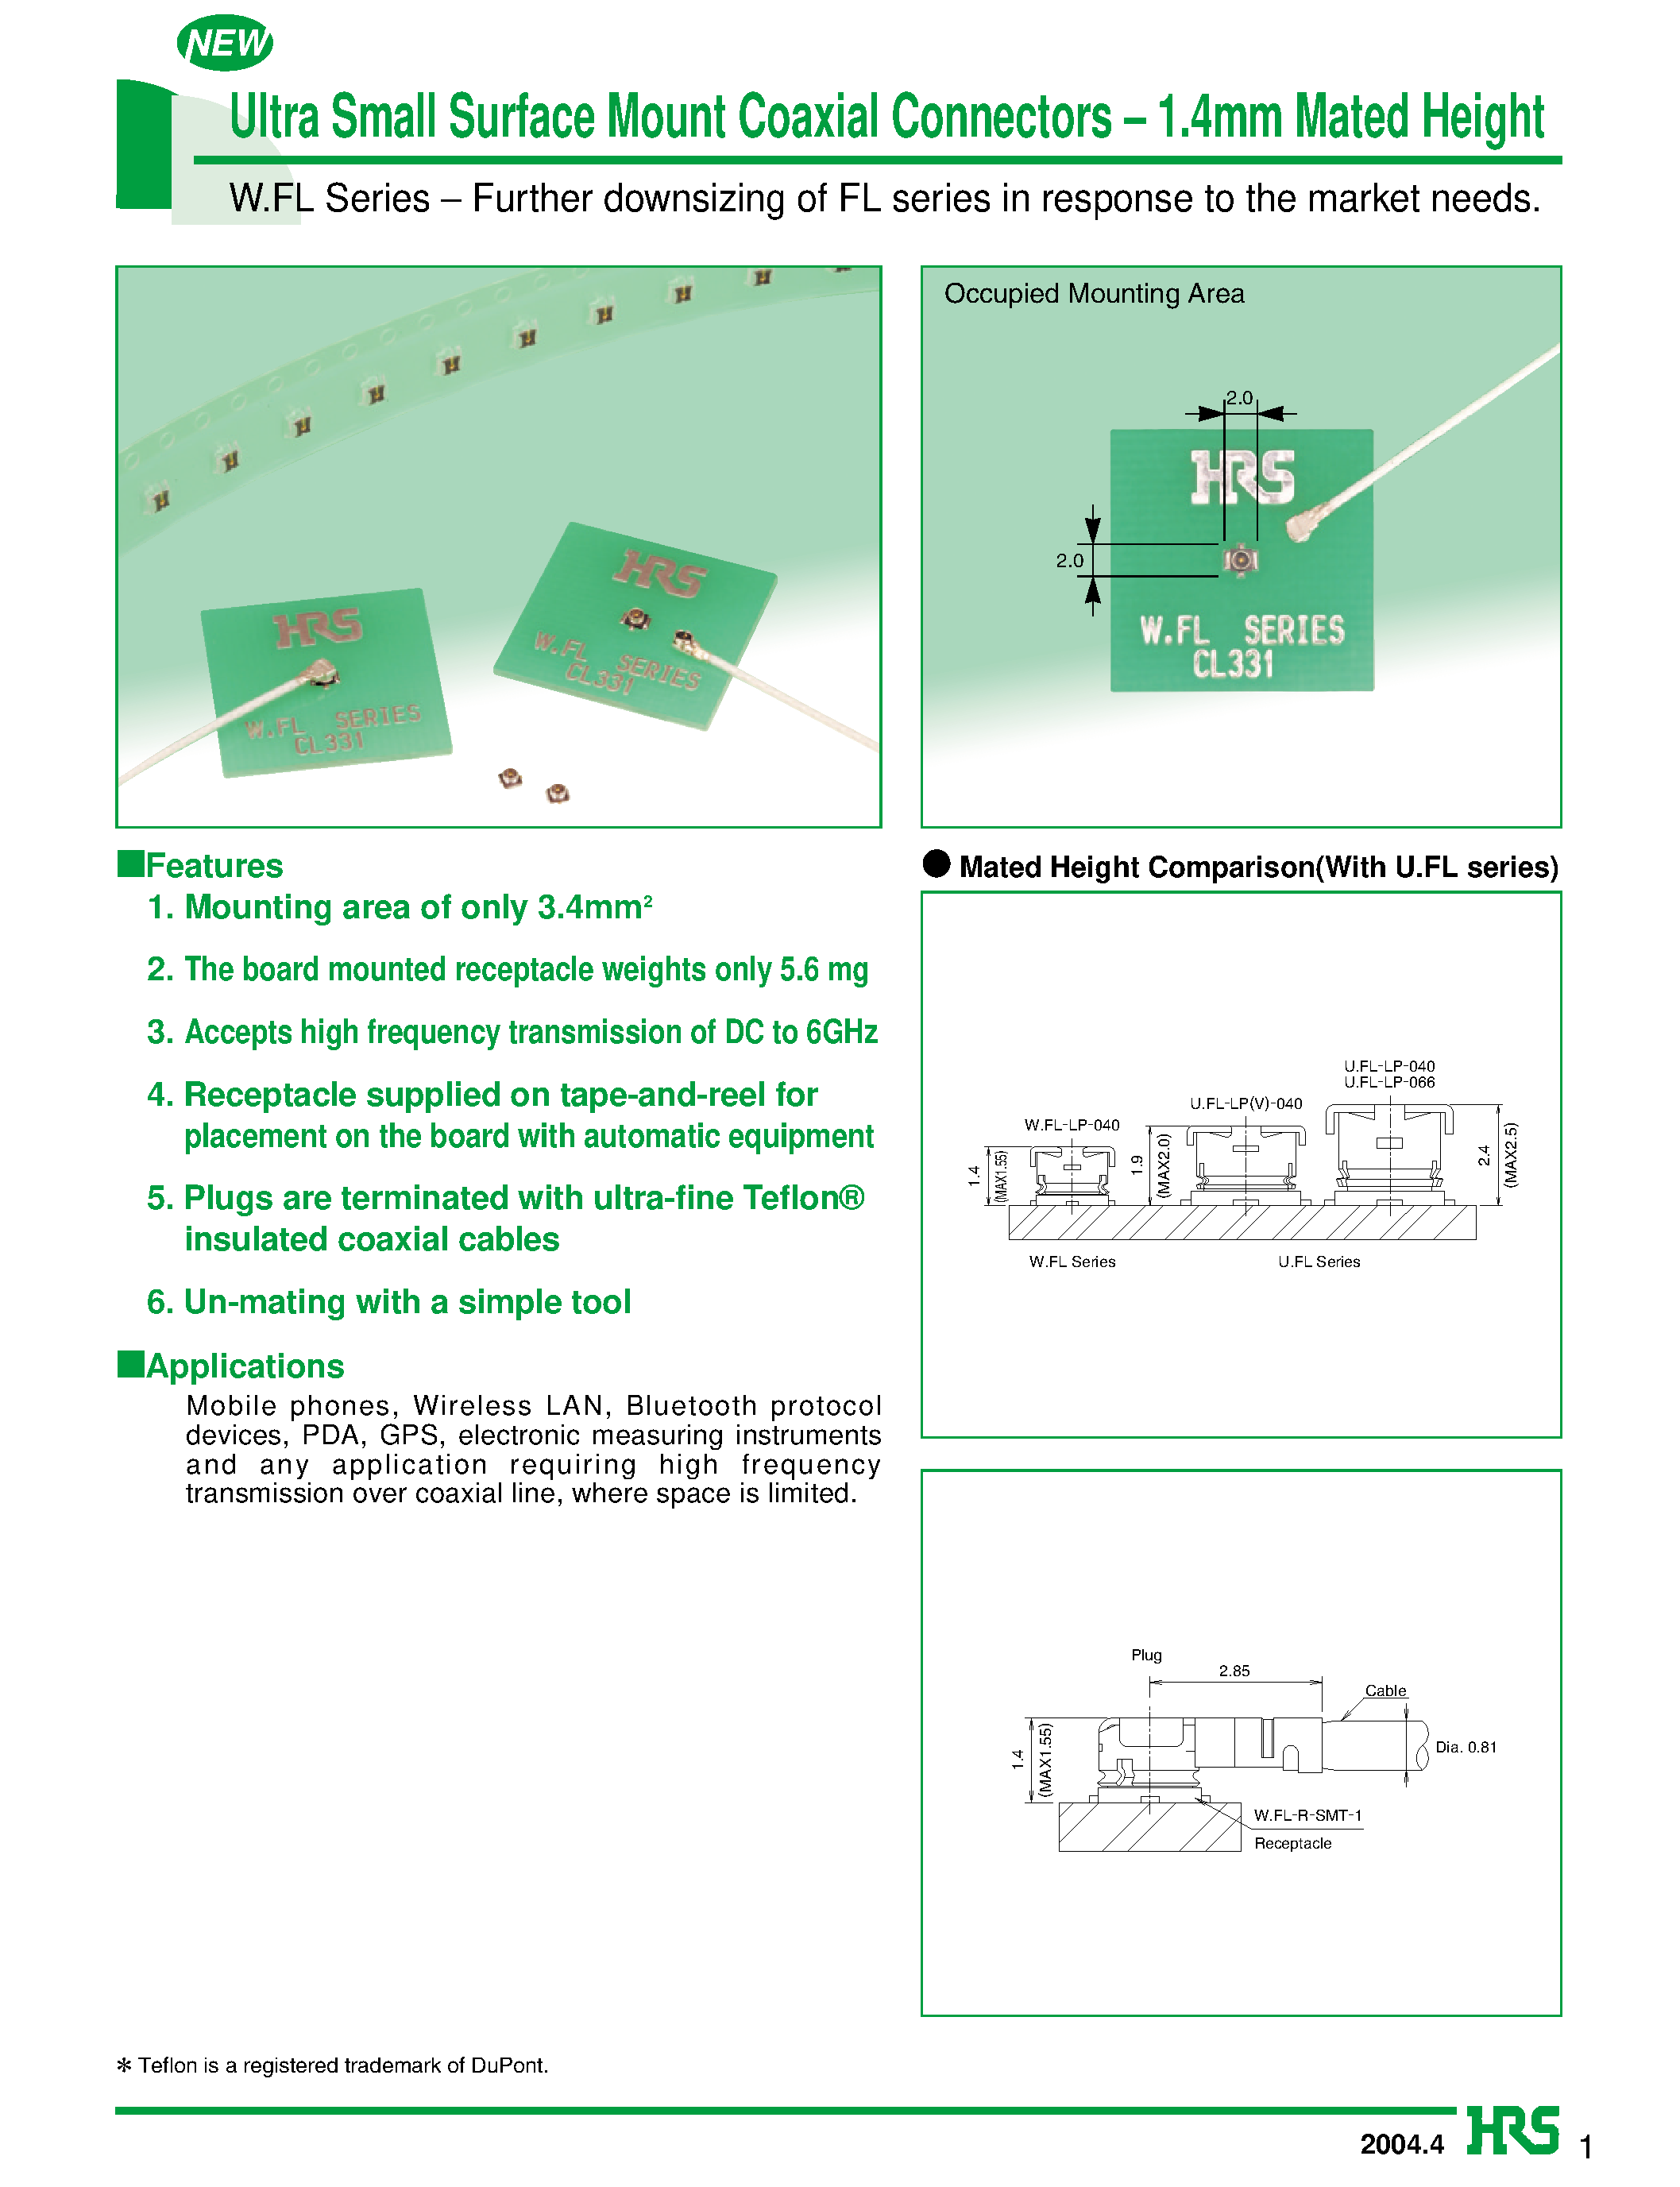 Datasheet HRMJ-W.FLP-ST1 - Ultra Small Surface Mount Coaxial Connectors - 1.4mm Mated Height page 1